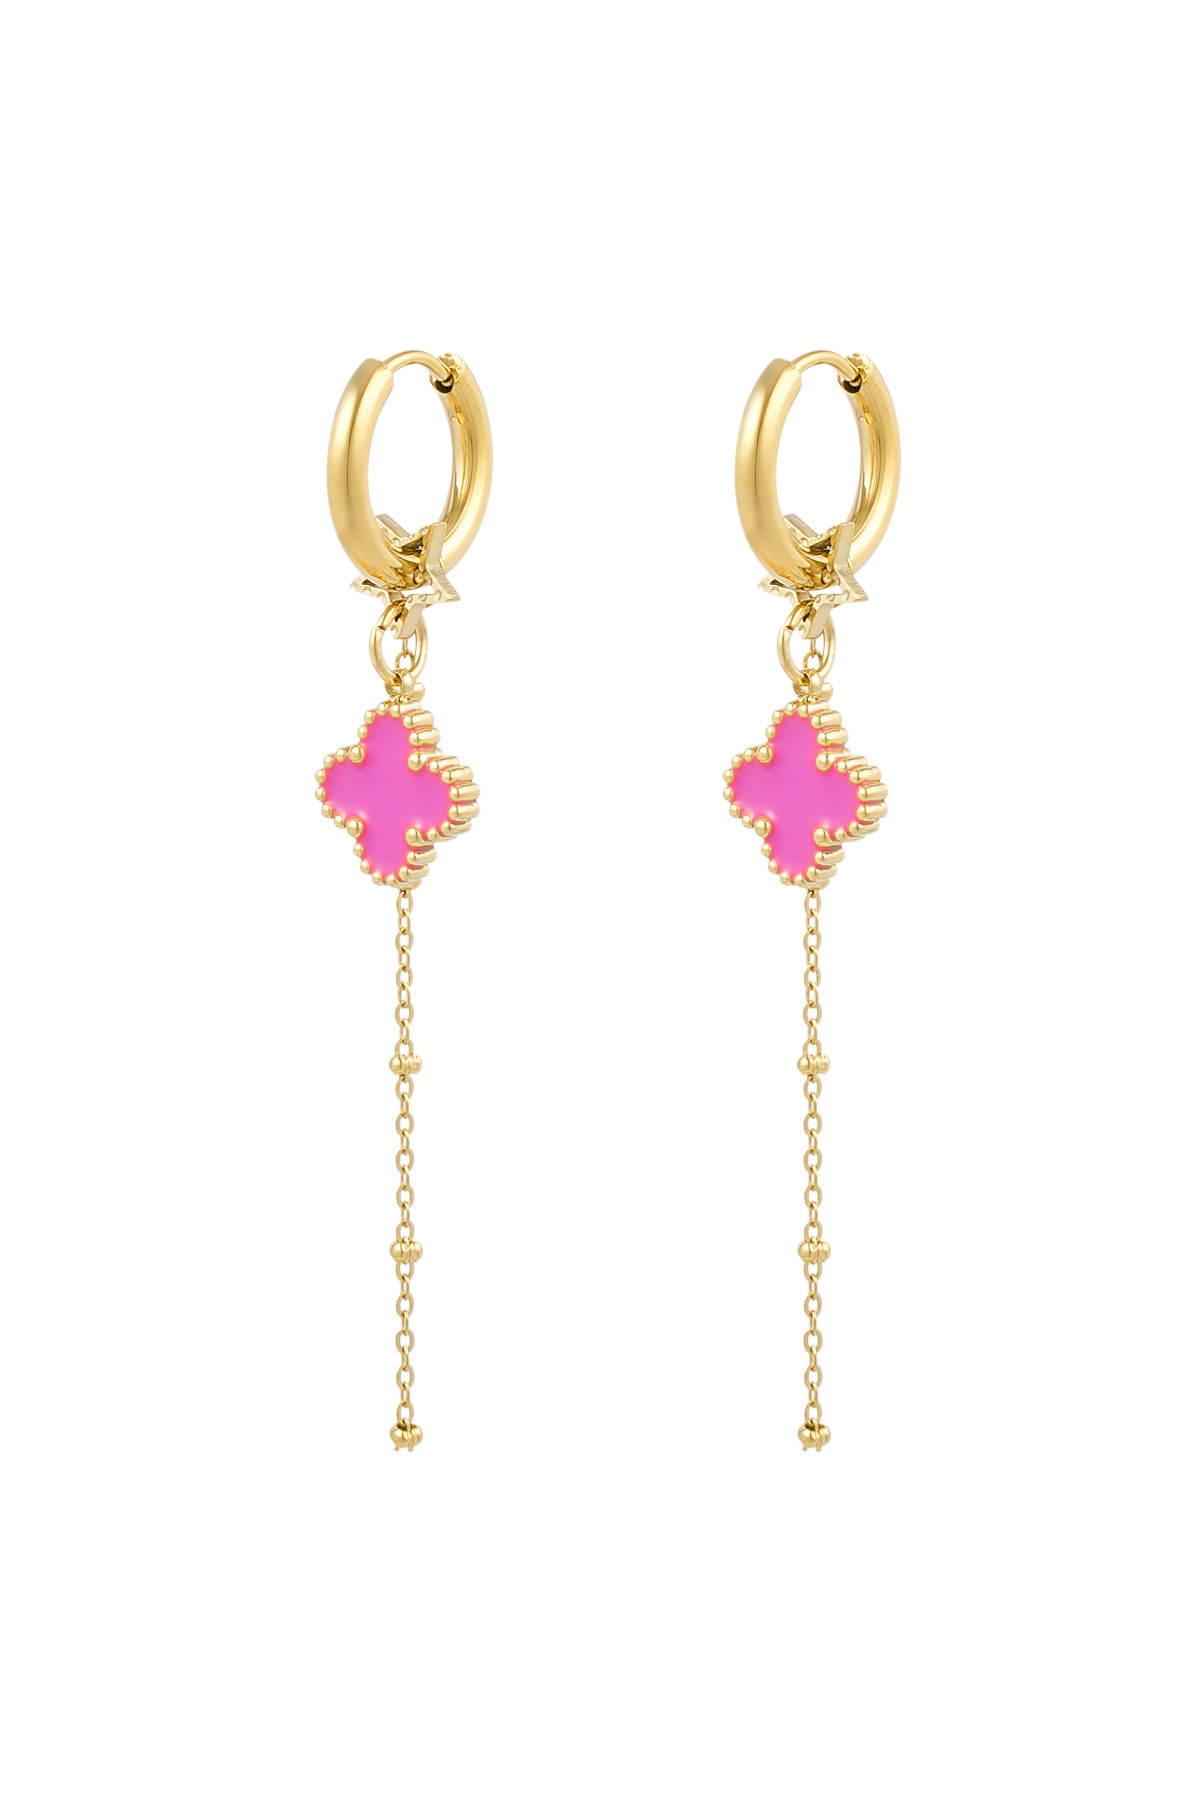 Earrings clover night - pink gold h5 